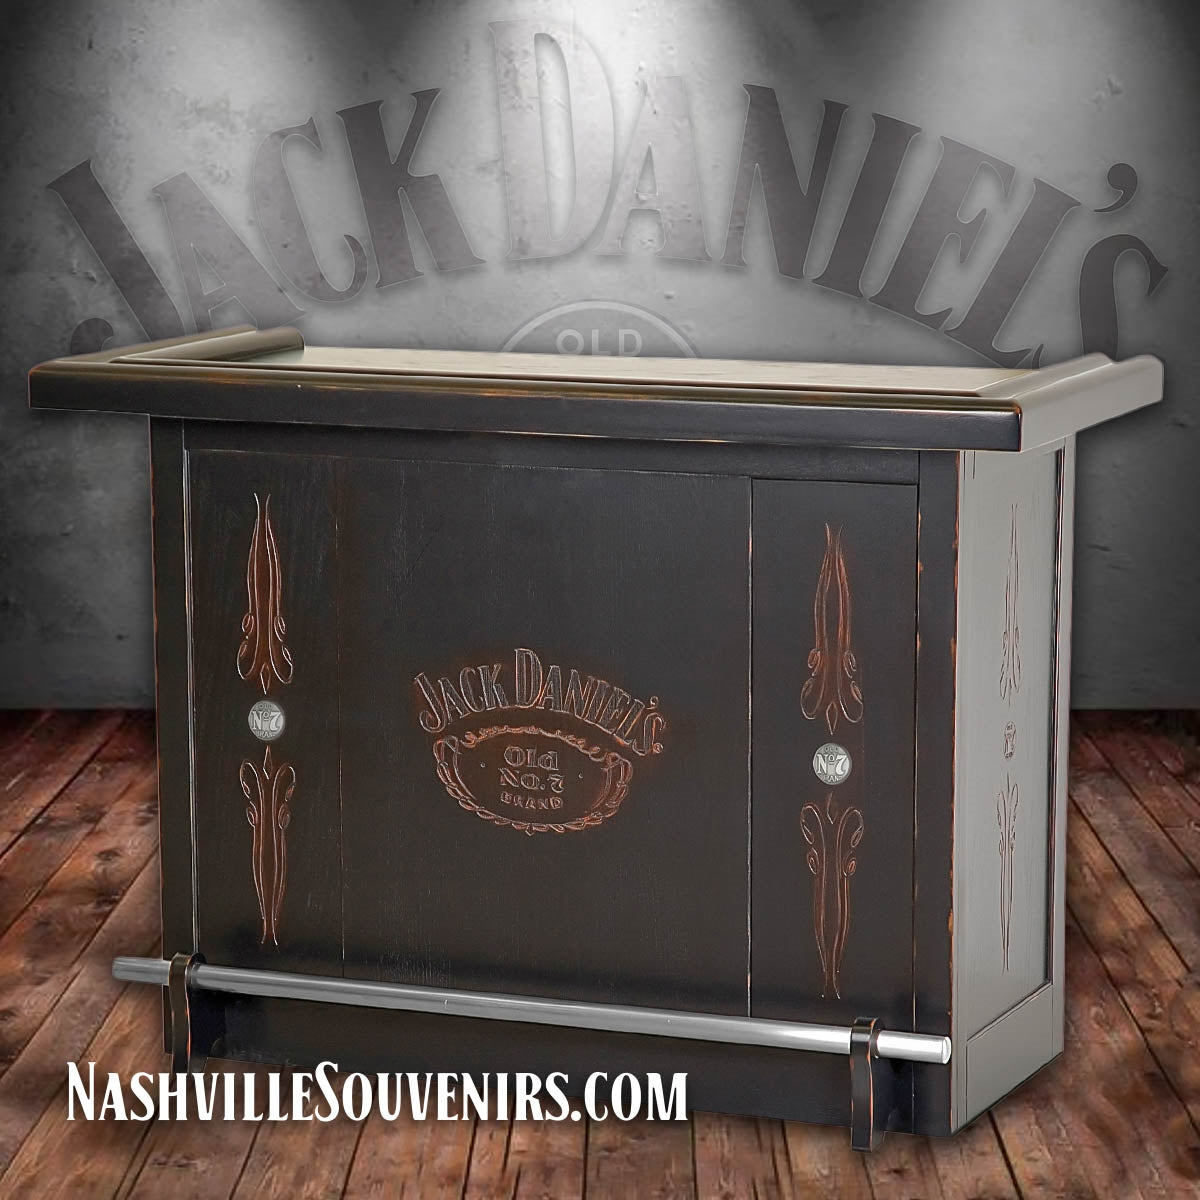 What Jack Daniel's man cave would be complete without a high quality Jack Daniel's home bar? Add some character with this home bar furniture that's hand rubbed in a Tennessee charcoal finish that harkens back to its Jack Daniel's distillery heritage in Lynchburg, Tennessee.